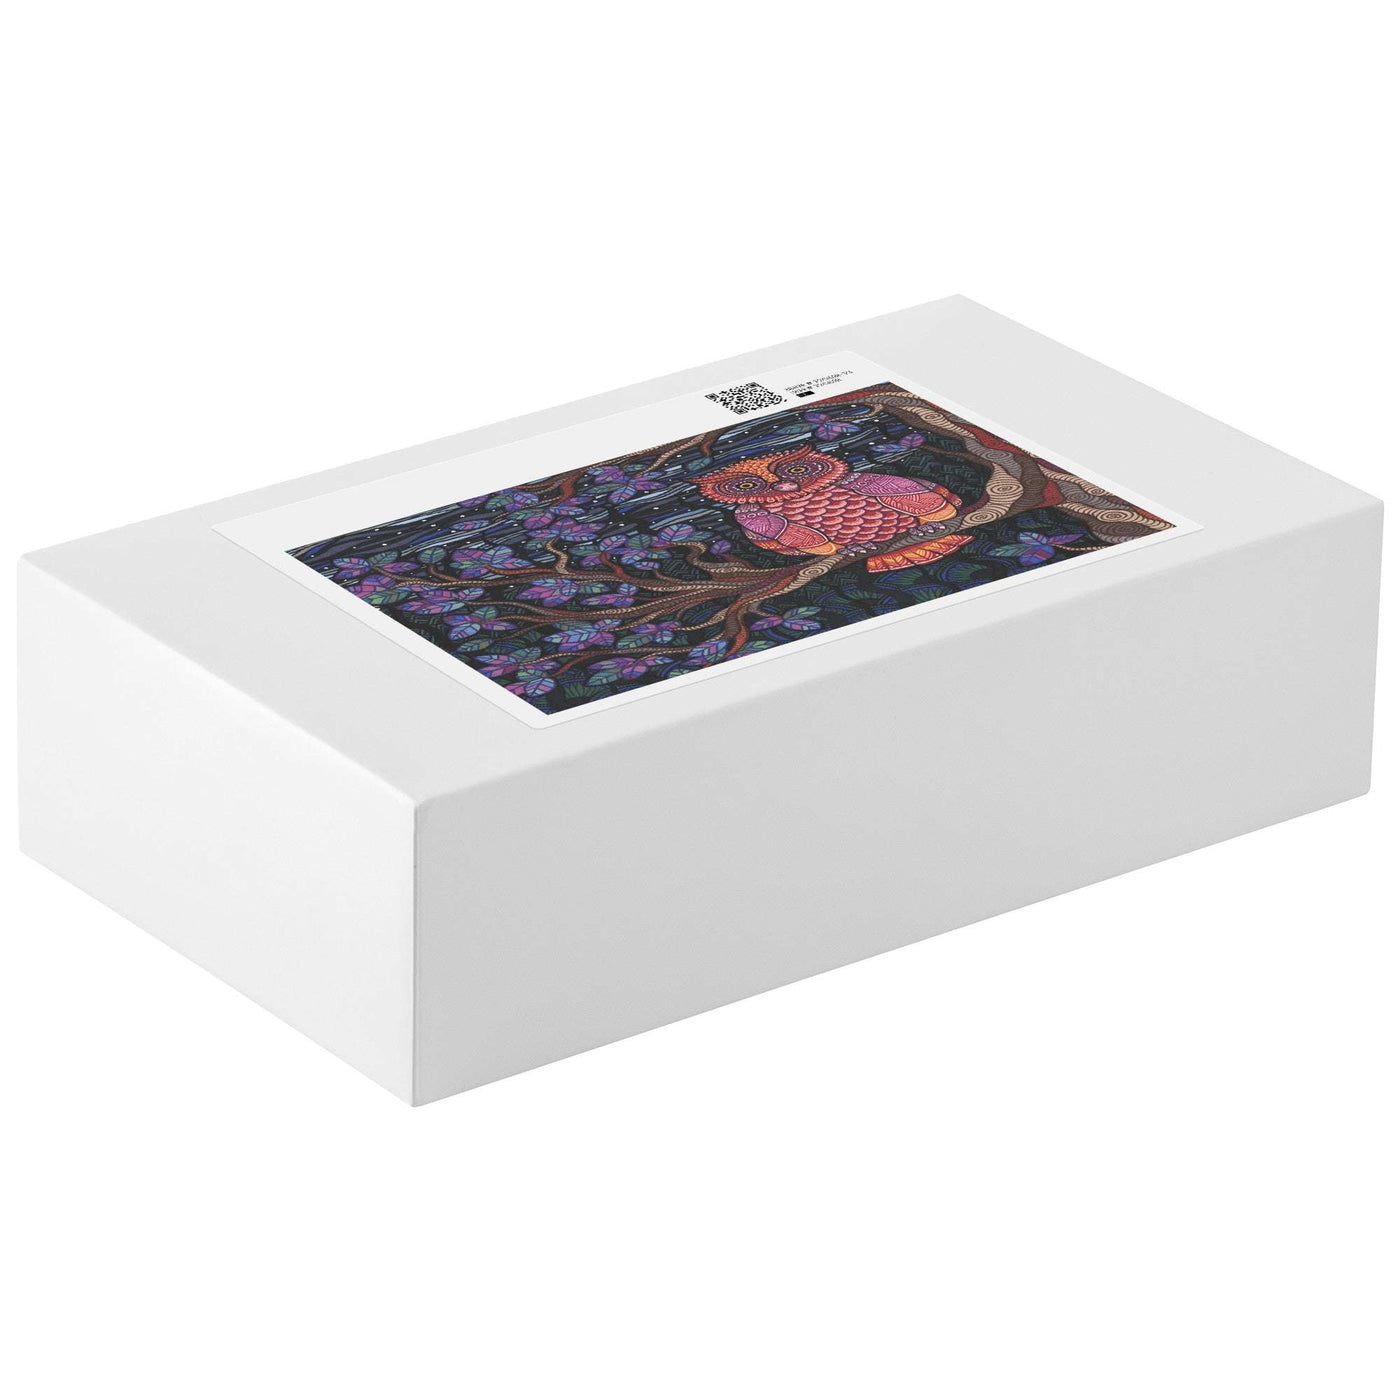 A white rectangular Owl Tree Puzzle box with a label on the lid showing a colorful pattern.